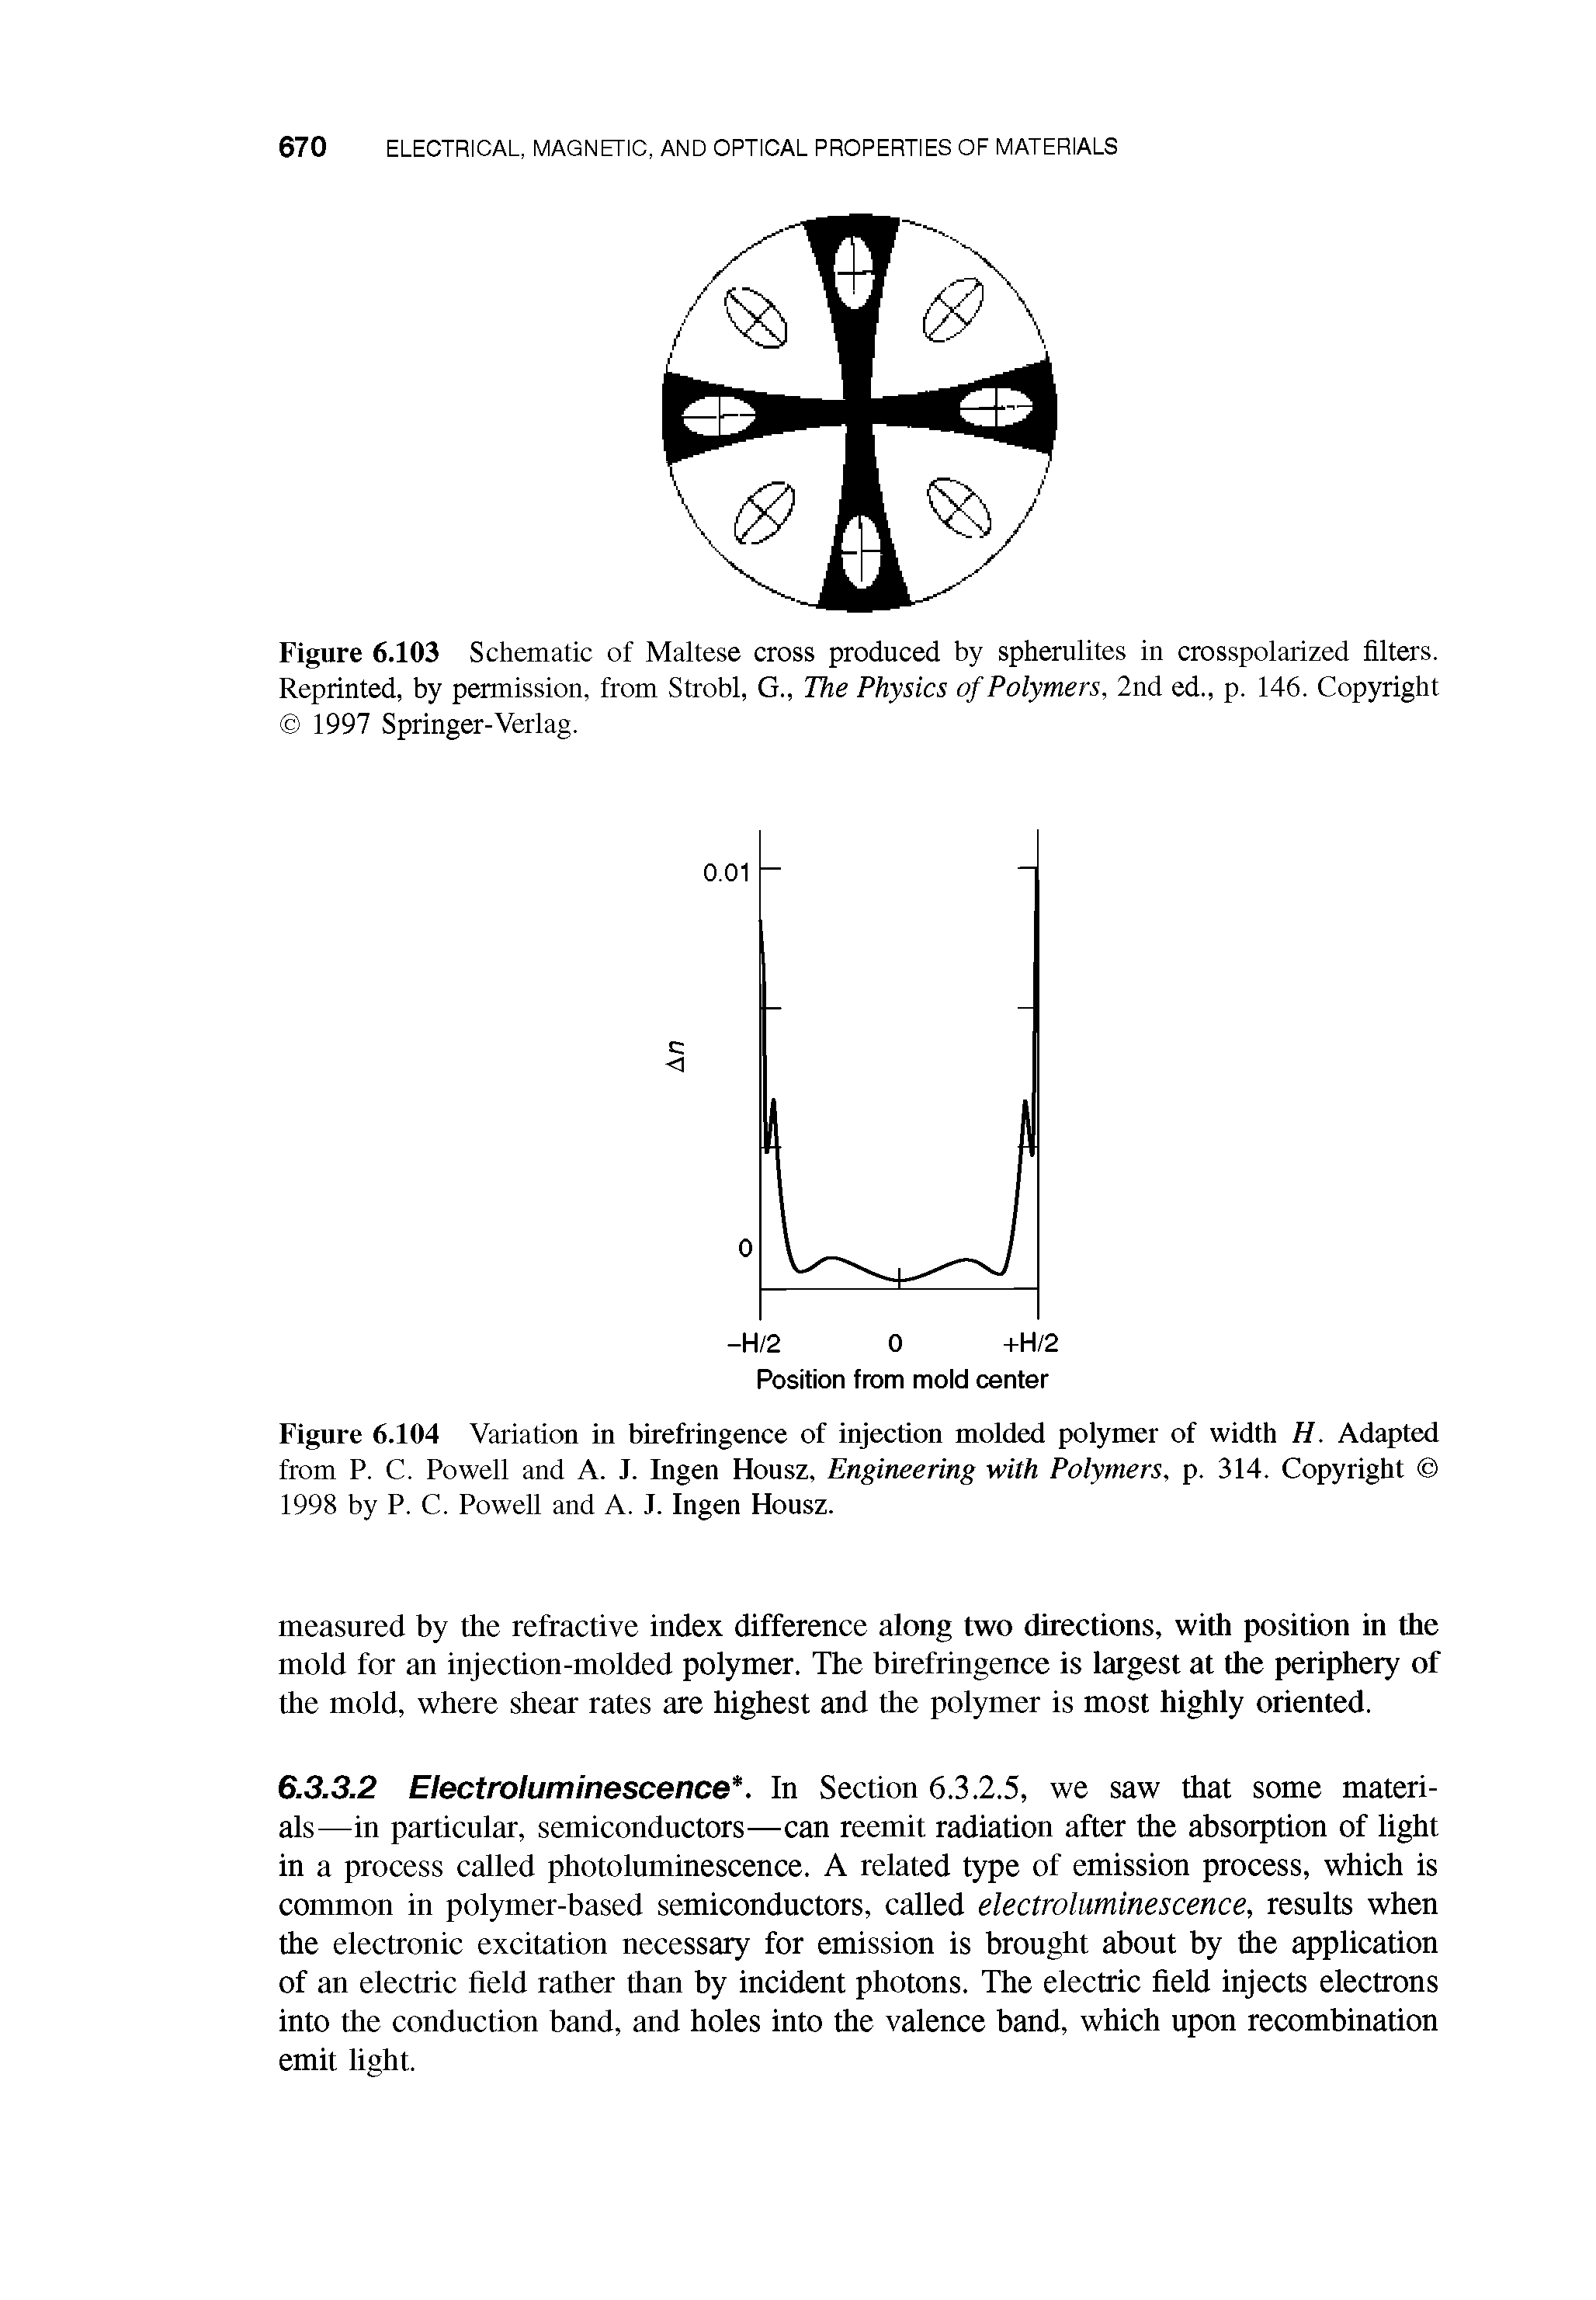 Figure 6.103 Schematic of Maltese cross produced by spherulites in crosspolarized filters. Reprinted, by permission, from Strobl, G., The Physics of Polymers, 2nd ed., p. 146. Copyright 1997 Springer-Verlag.